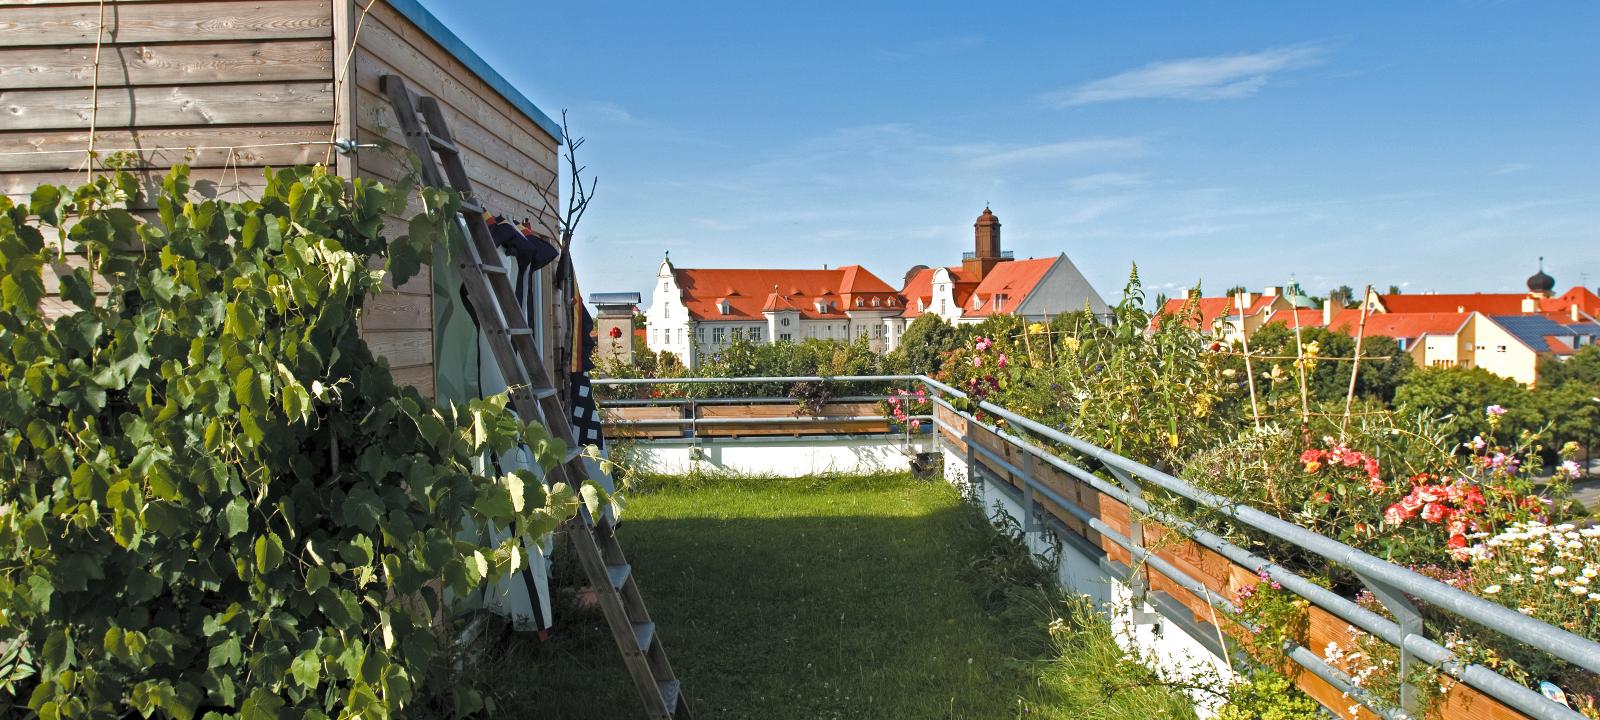 Roof garden with a meadow and vines in front of a cubical wooden house